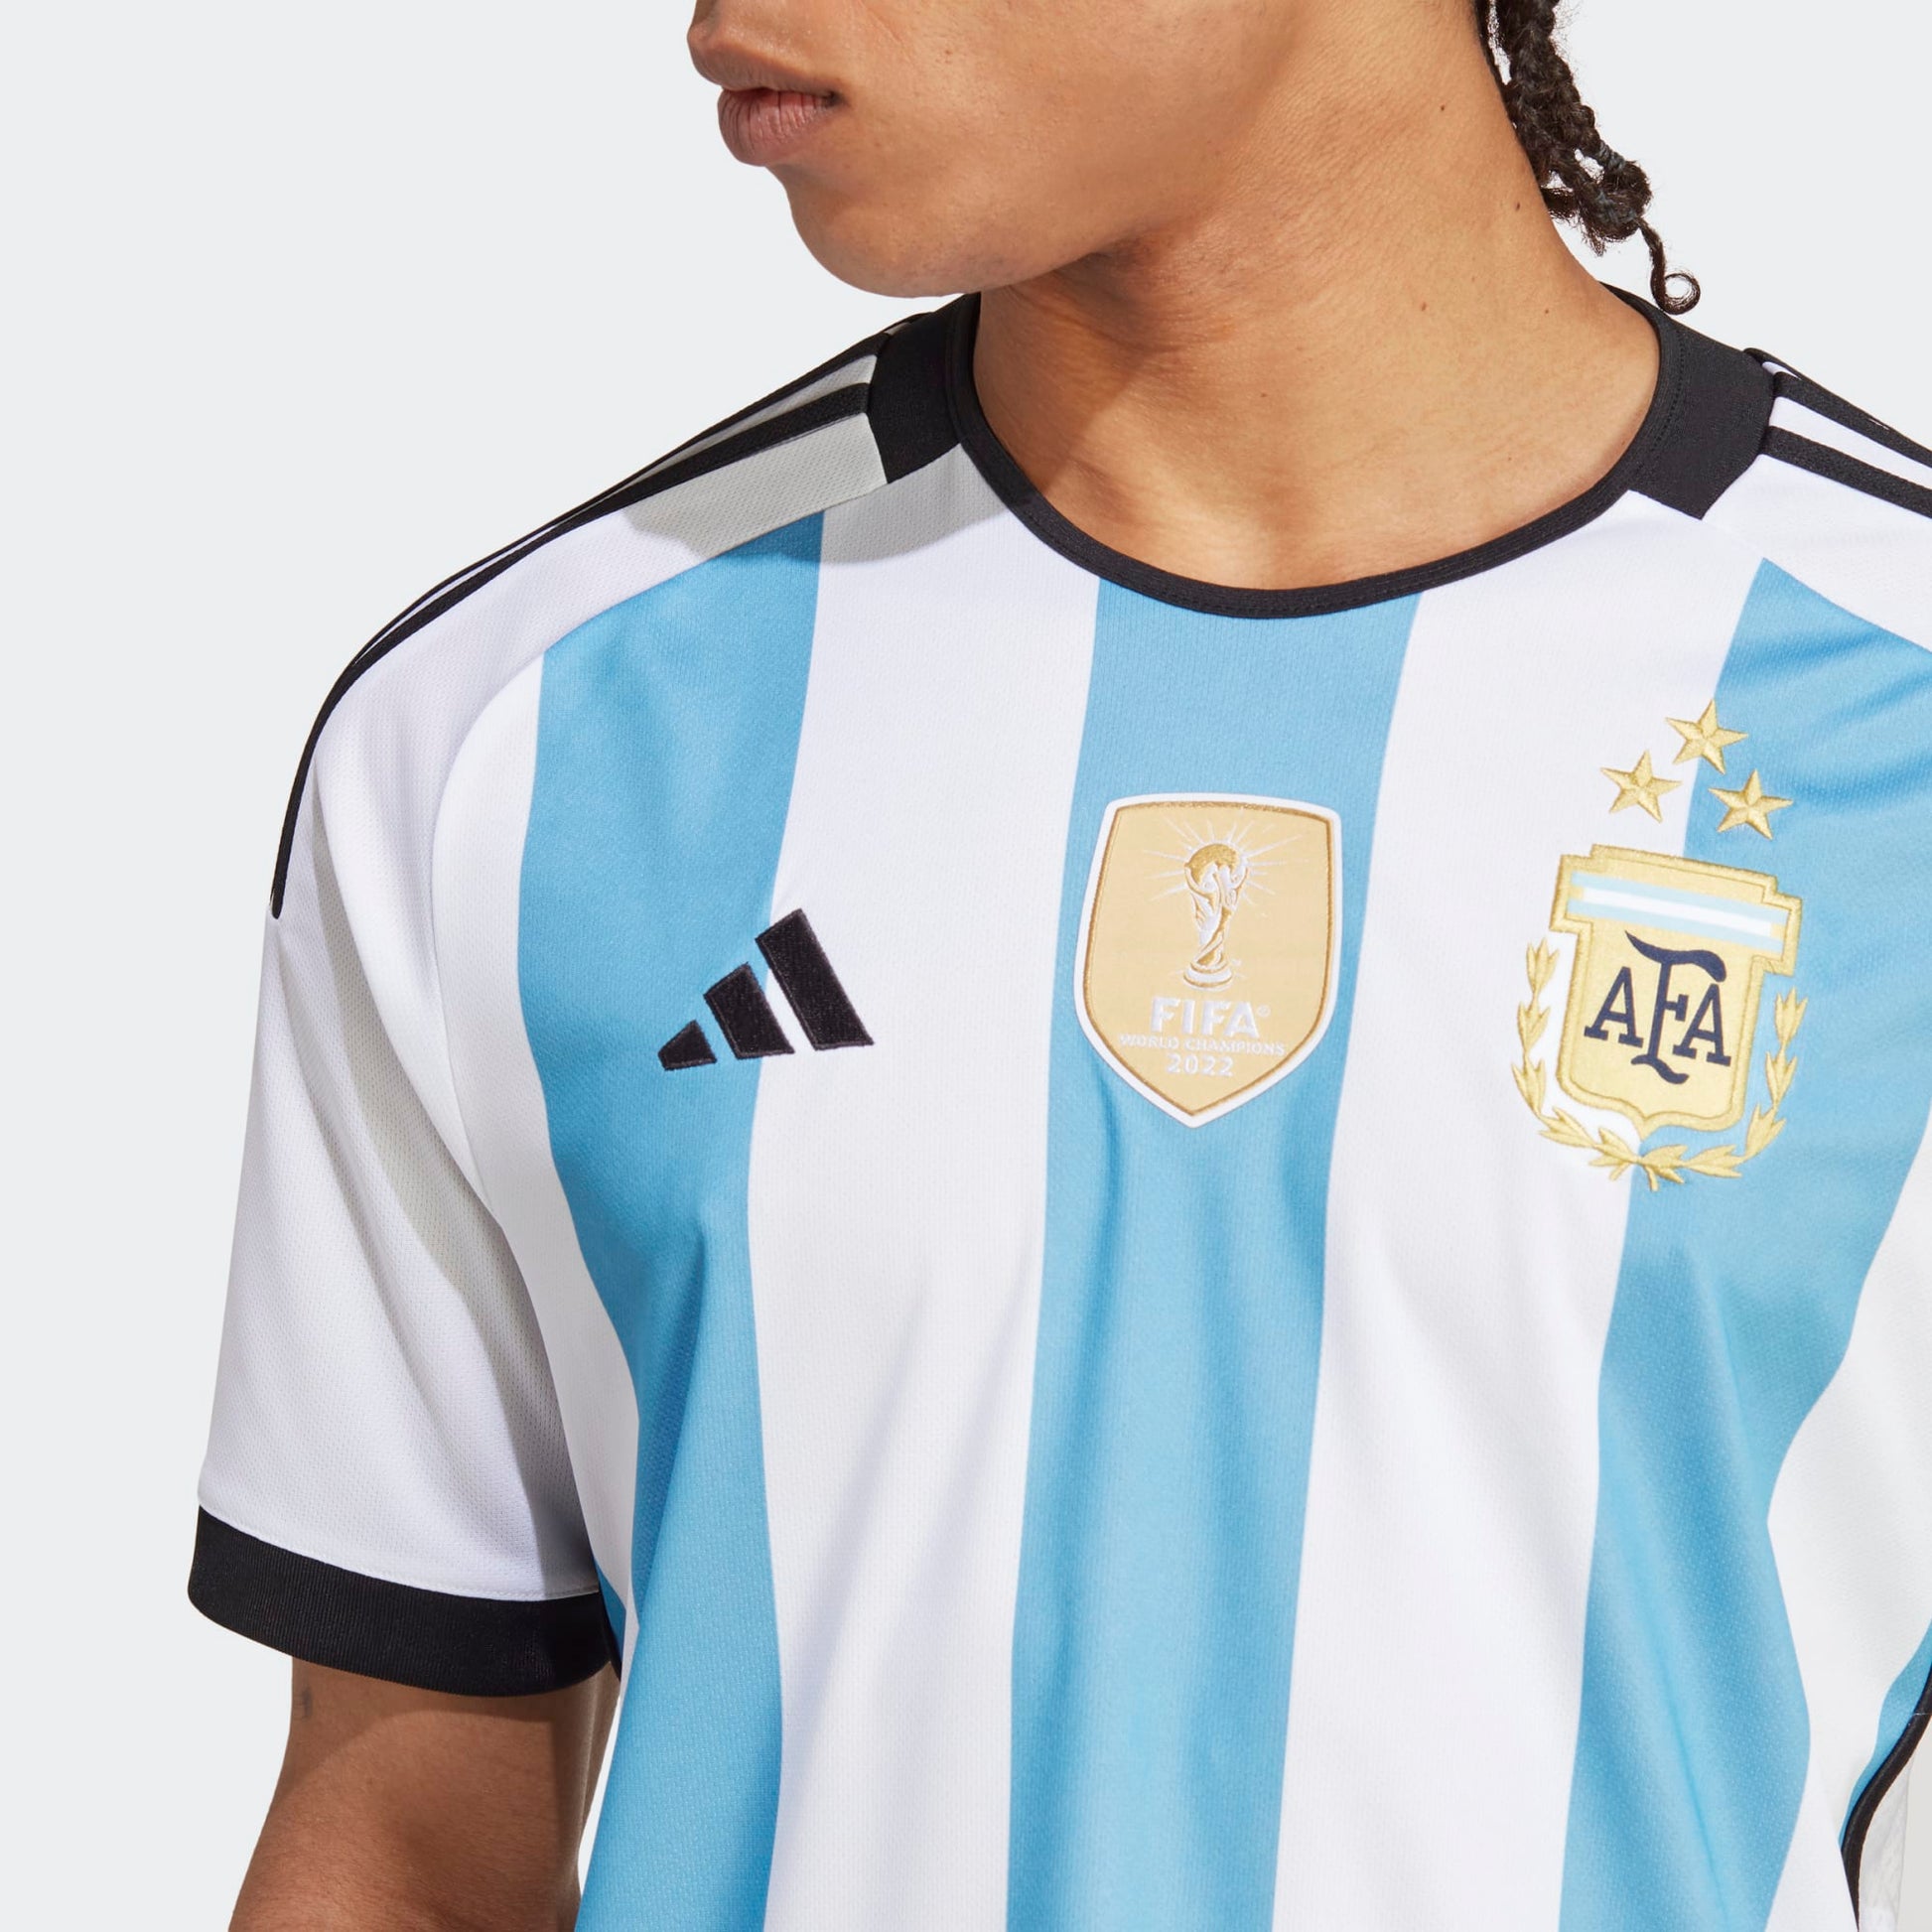 adidas Argentina Away Authentic Jersey - Blue | Men's Soccer | adidas US